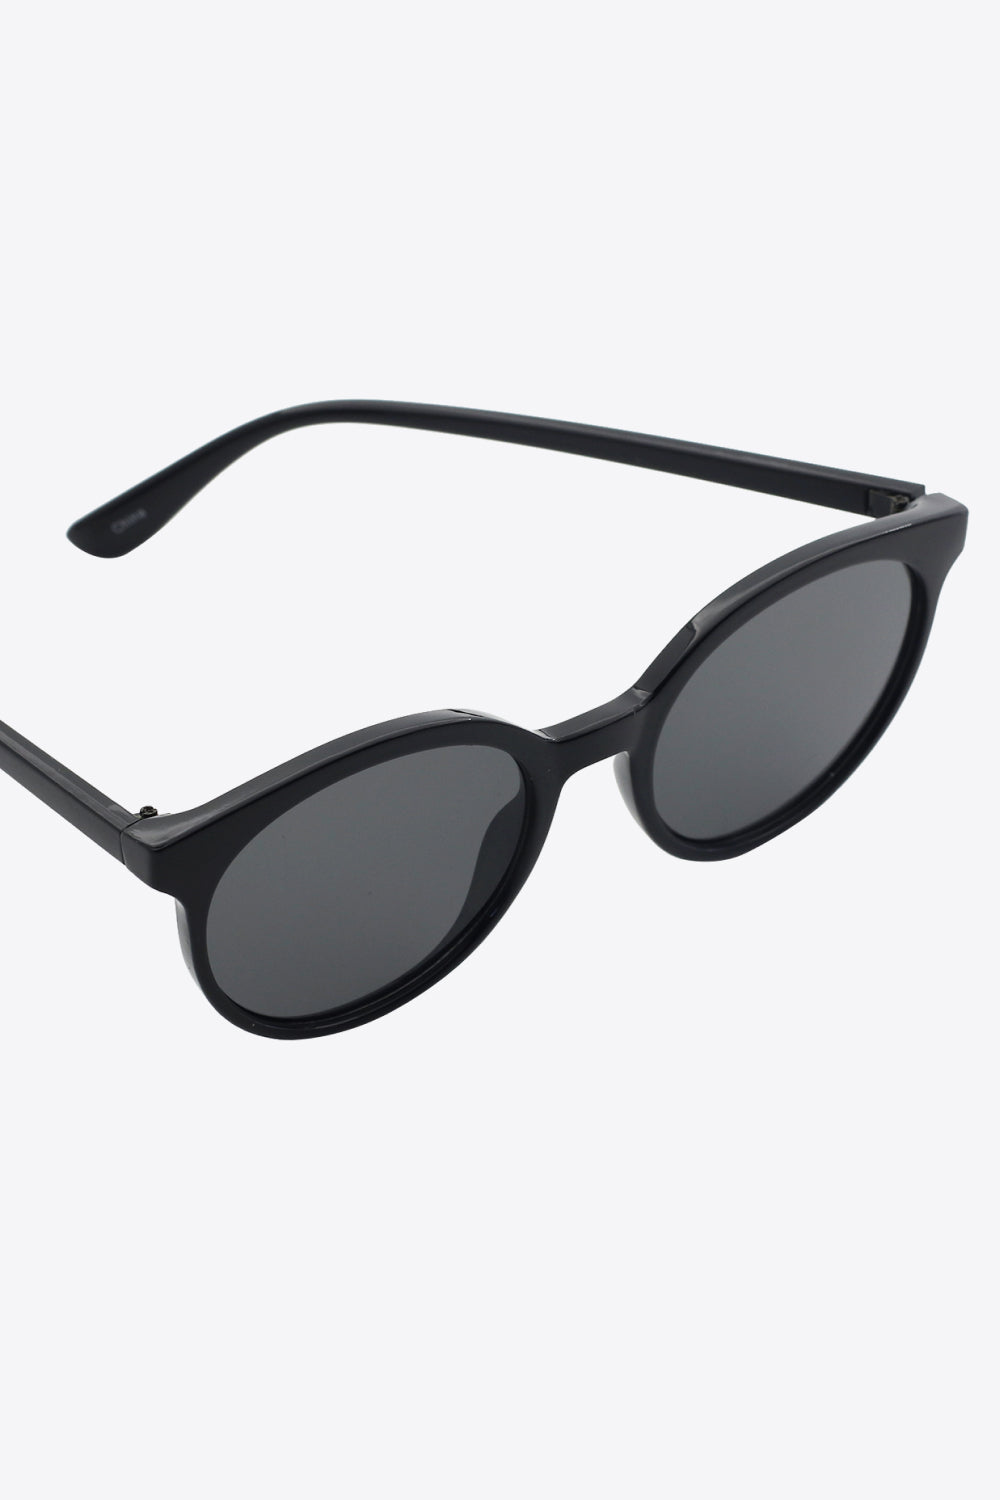 Round Full Rim Polycarbonate Frame Sunglasses - Online Only